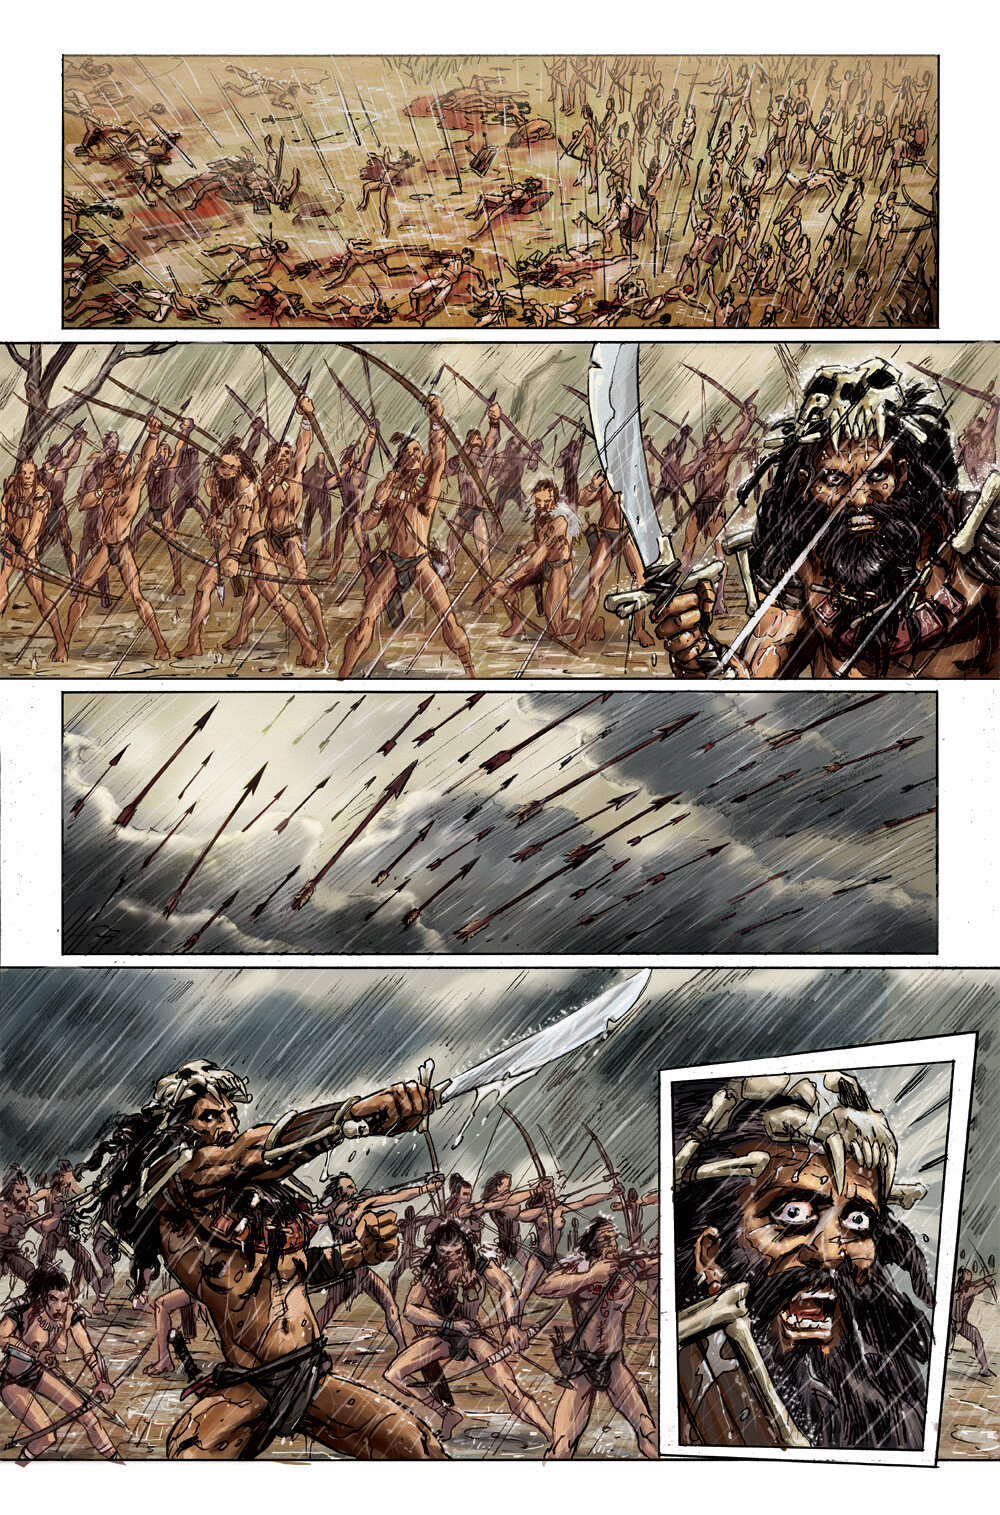 Scions of the Cursed King #2
Page 2, color by Vivek Goel